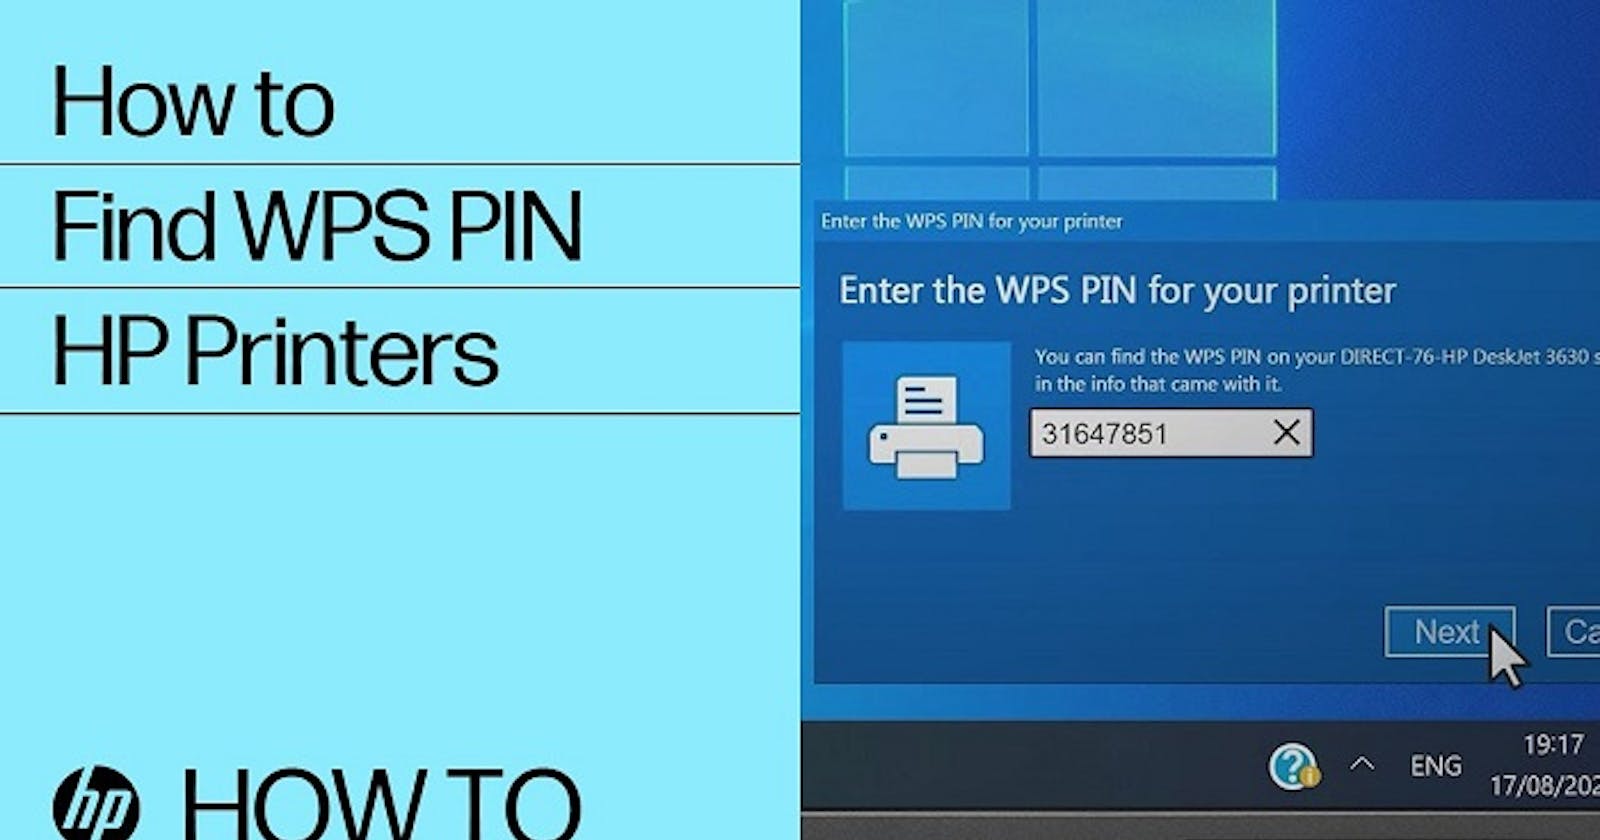 How to Find the Wireless Network Password or PIN to Connect an HP Printer?